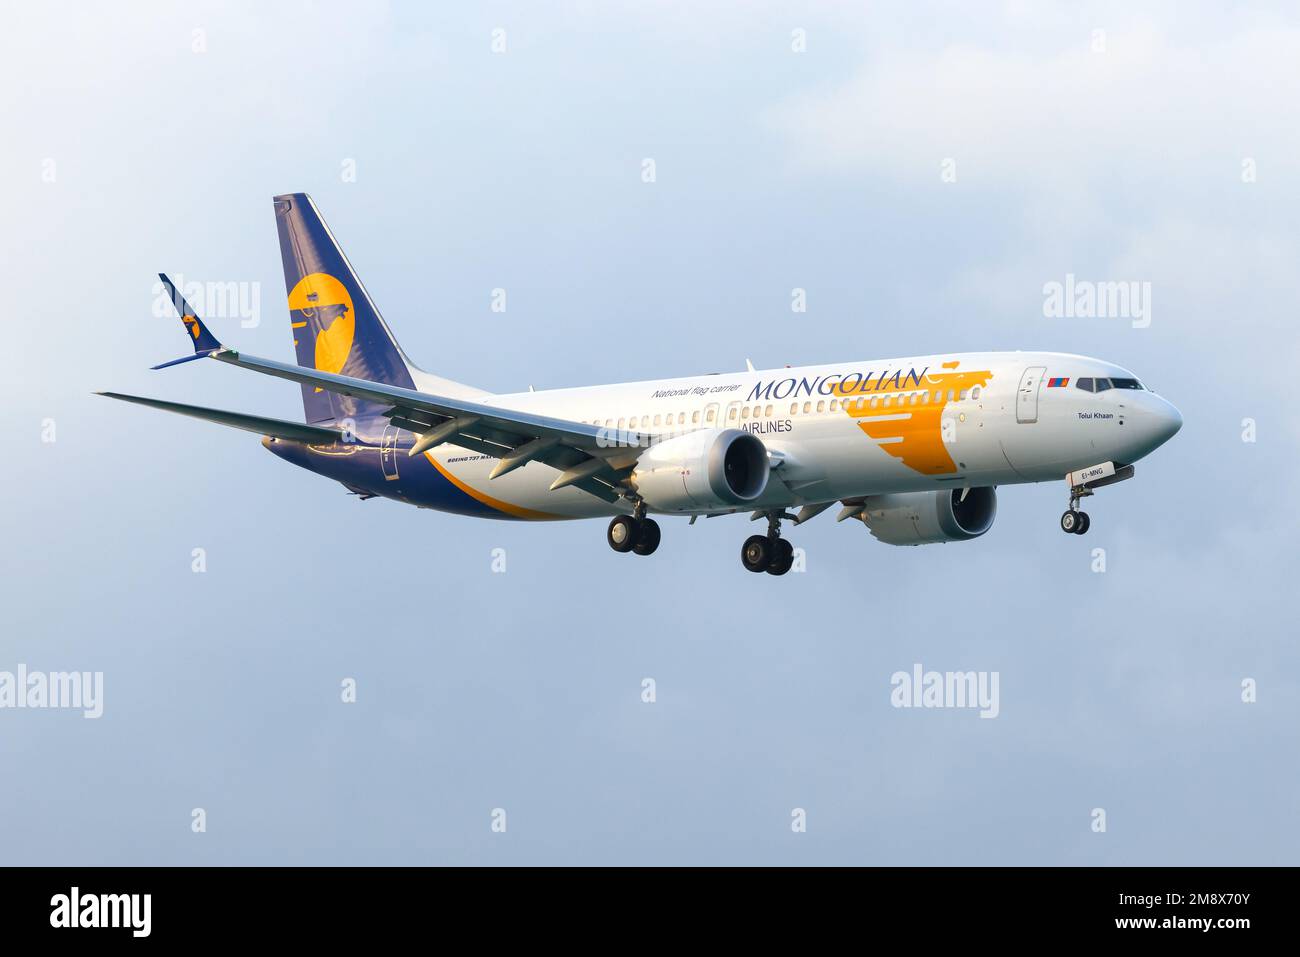 MIAT Mongolian Airlines Boeing 737 Max airplane. Airline from Mongolia, MIAT Boeing 737 aircraft. Stock Photo